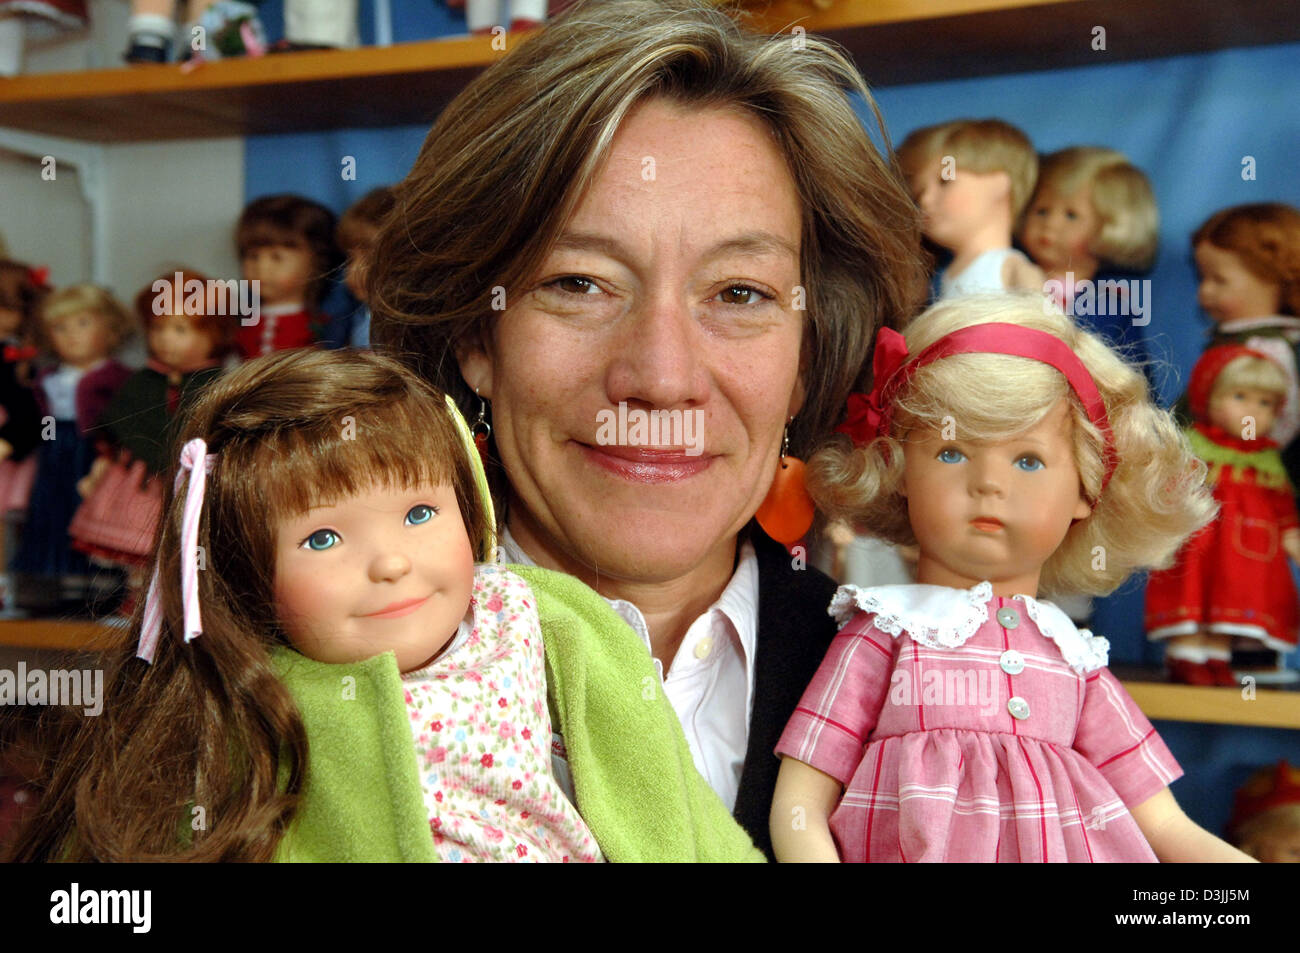 dpa) - Business manager of 'Kaethe-Kruse-Dolls' Andrea Kathrin Christenson  poses with two dolls in front of the picture of Kaethe Kruse (1883-1968),  foundress of the company, in Donauwoerth, Germany, 11 April 2005.